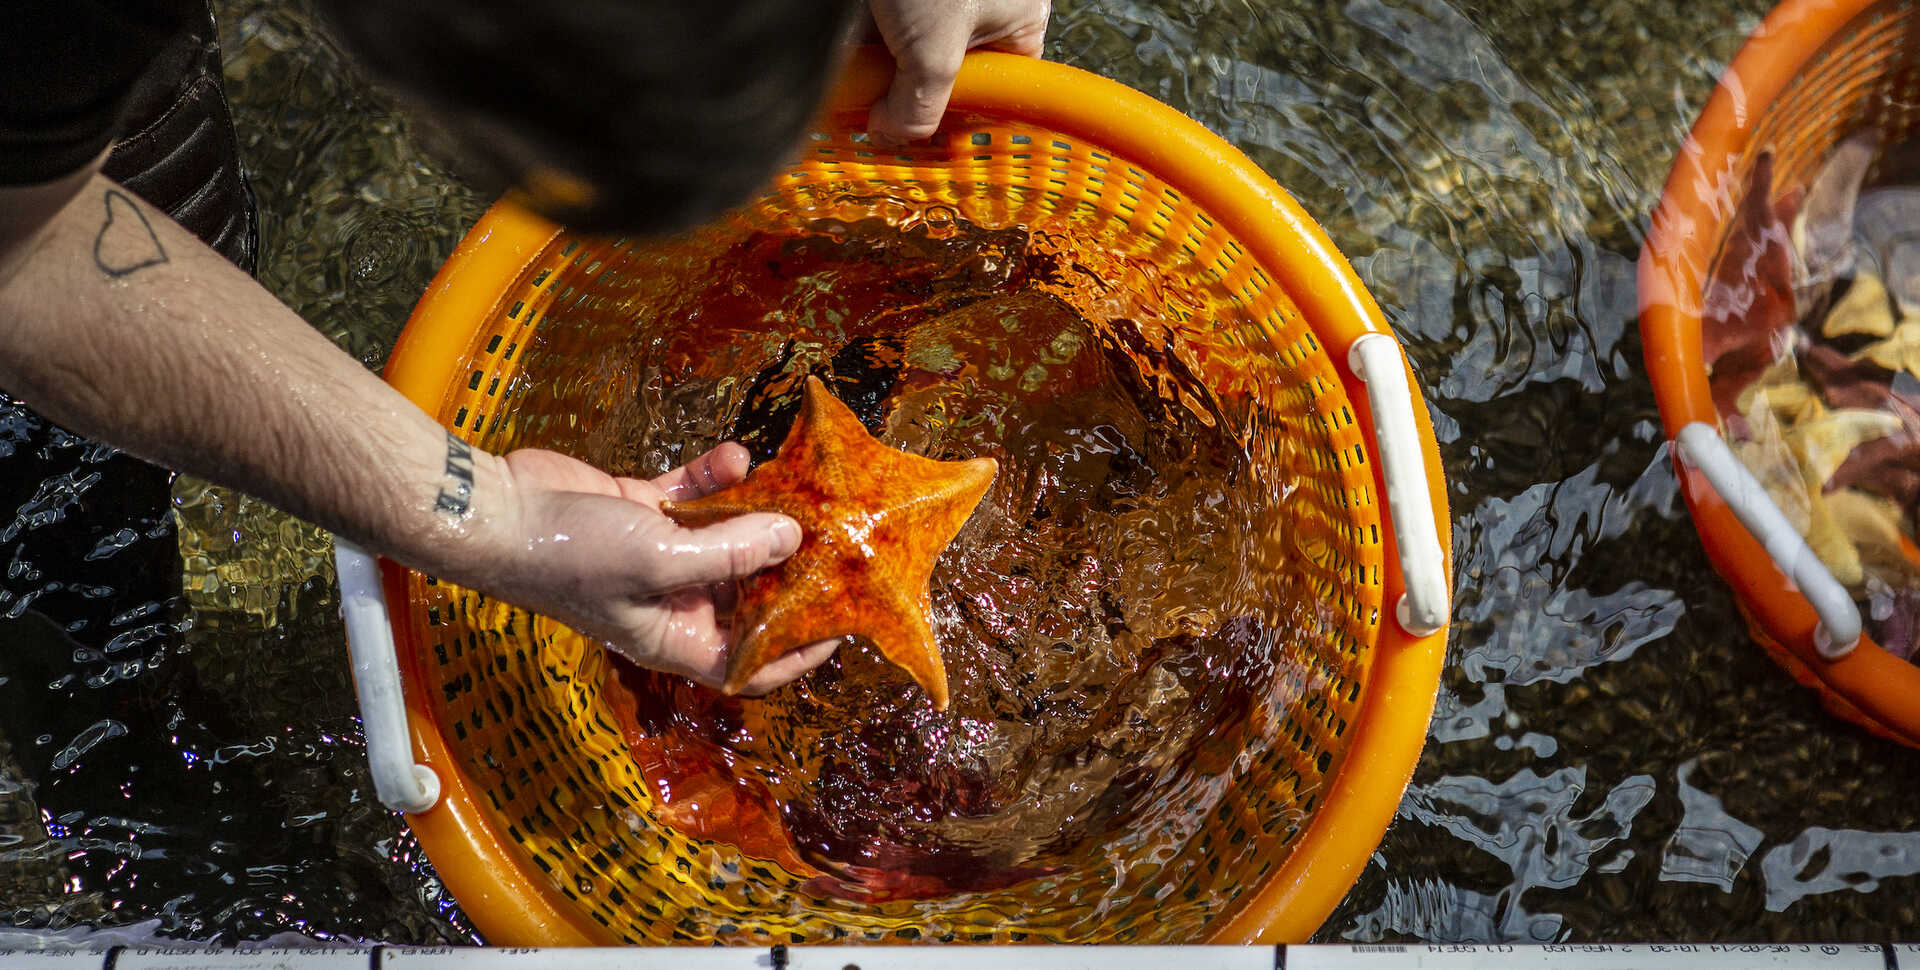 An Academy biologist holds an orange bat star above an orange bucket submerged in water, releasing the star into the aquarium.